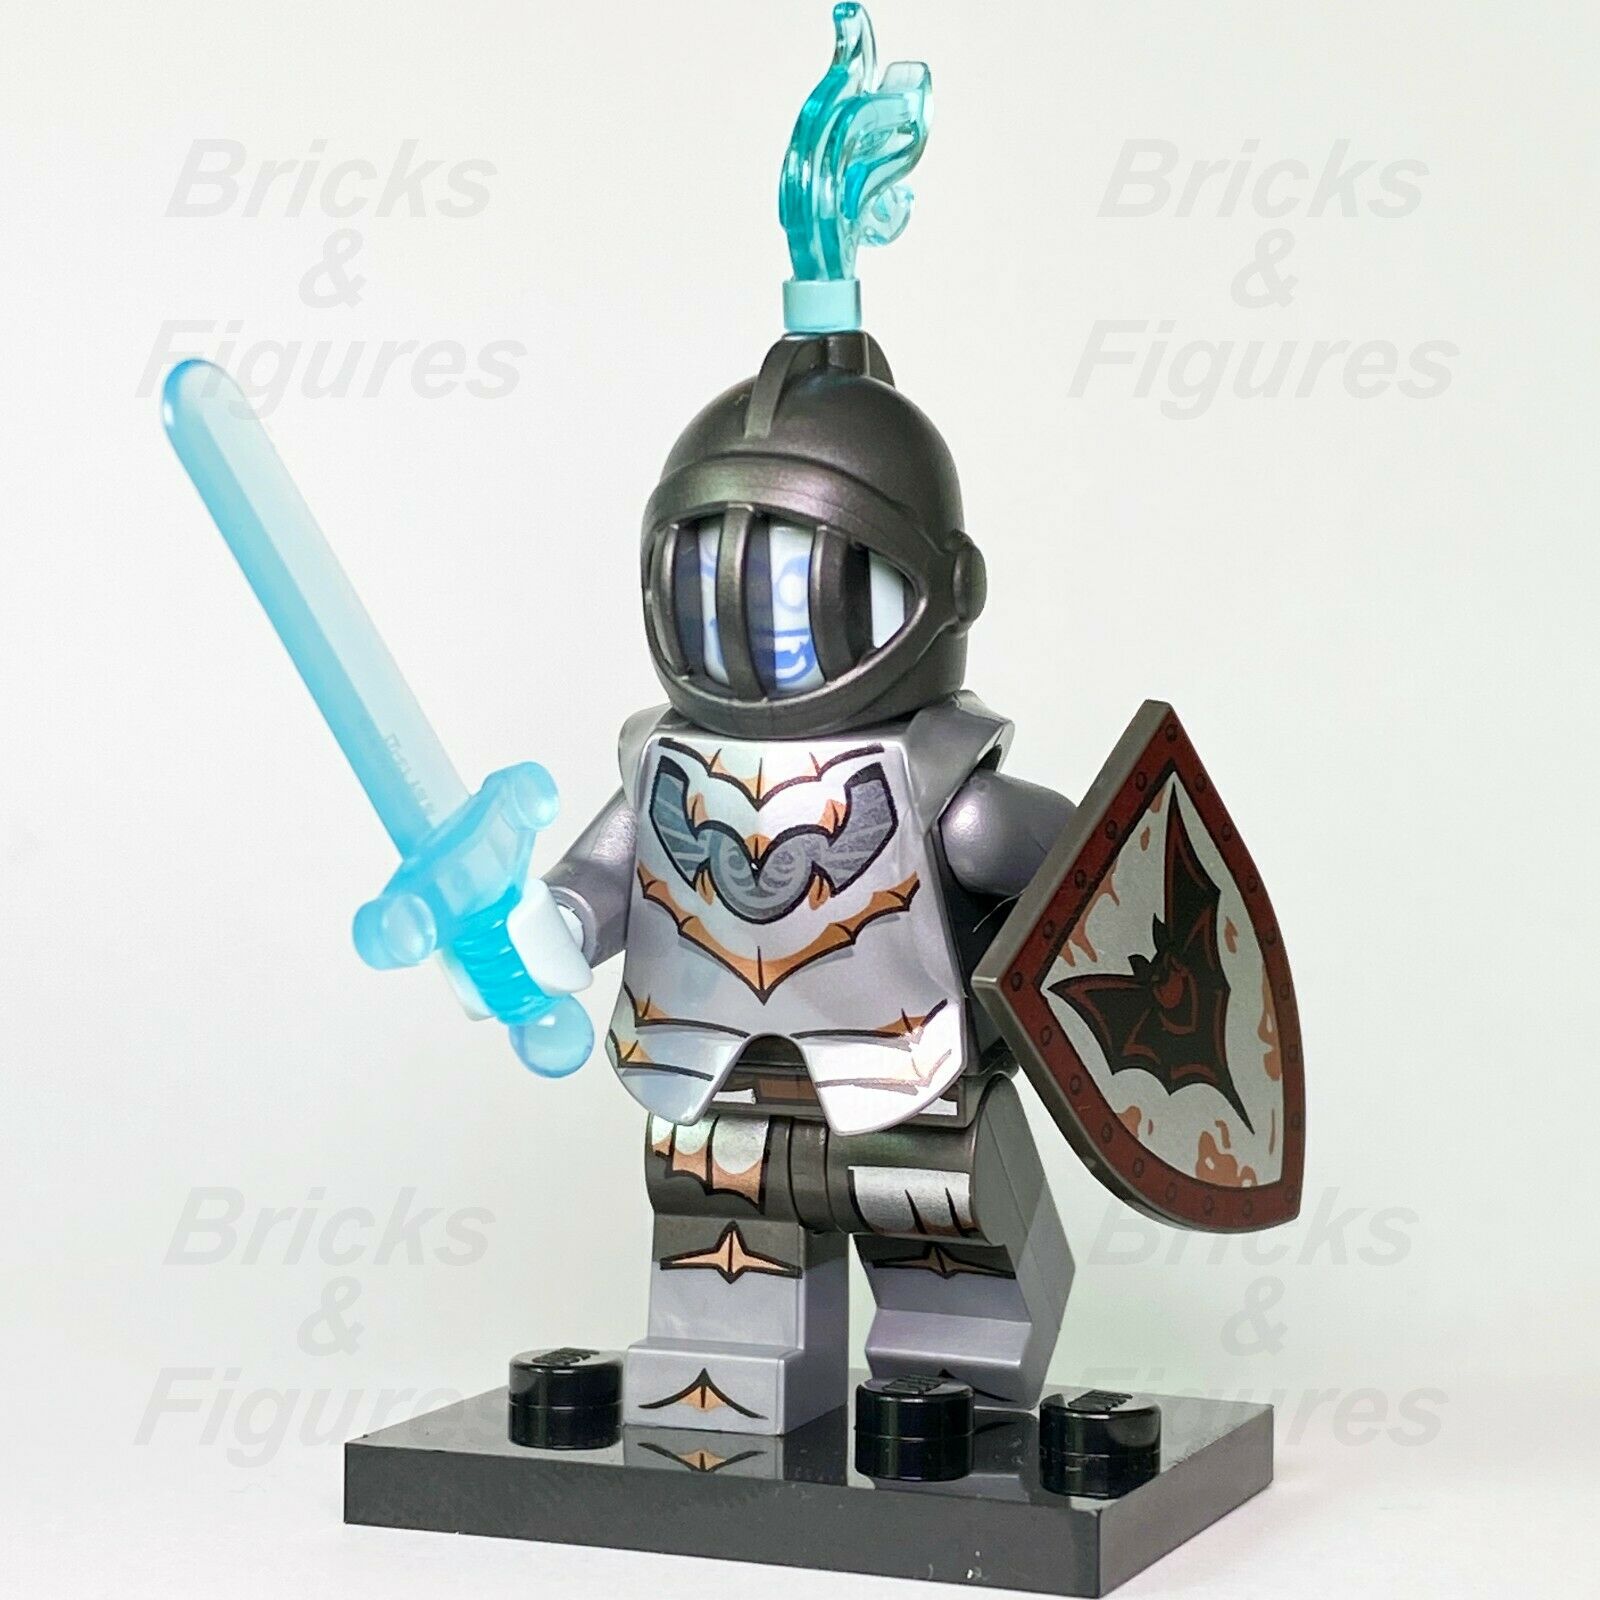 LEGO Collectible Minifigures Fright Knight Sword & Shield Series 19 71025 - Bricks & Figures